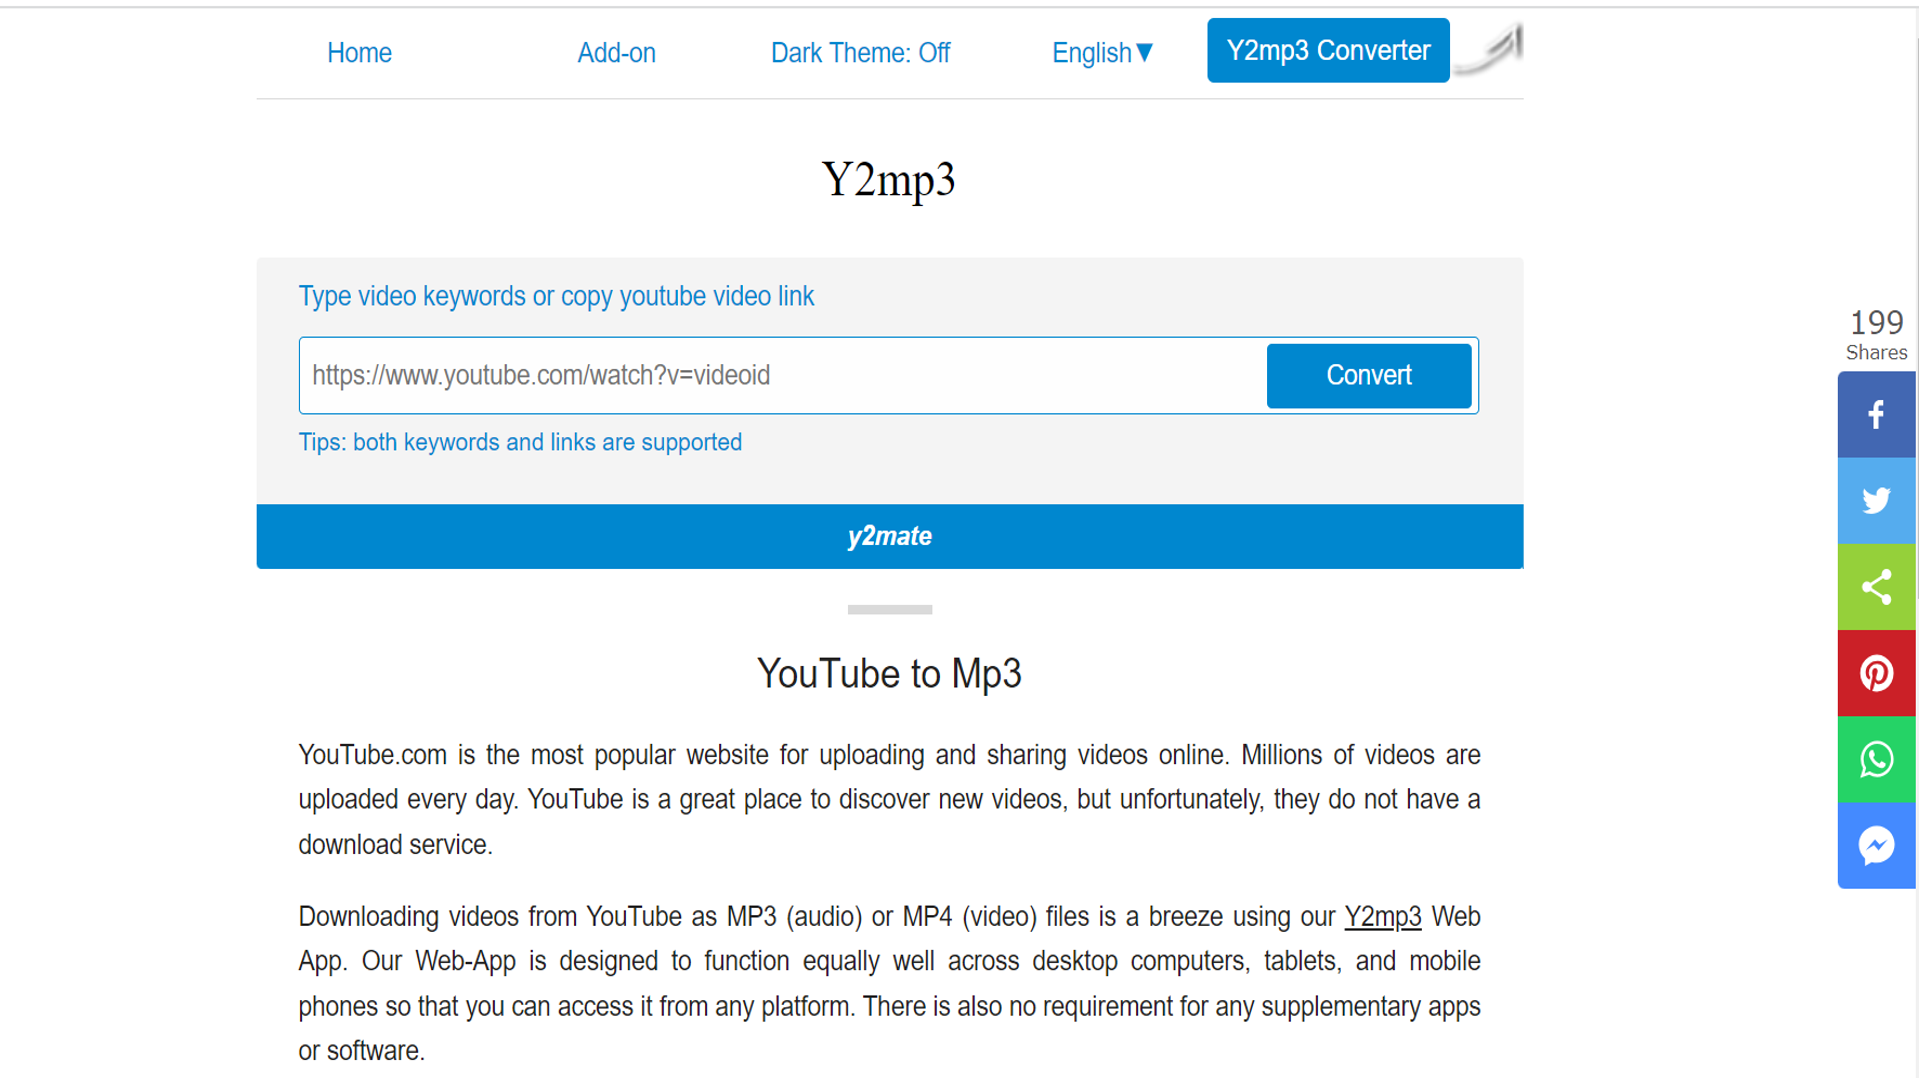 The best way to get your favorite YouTube videos in MP3 format use YouTube to MP3 converter.